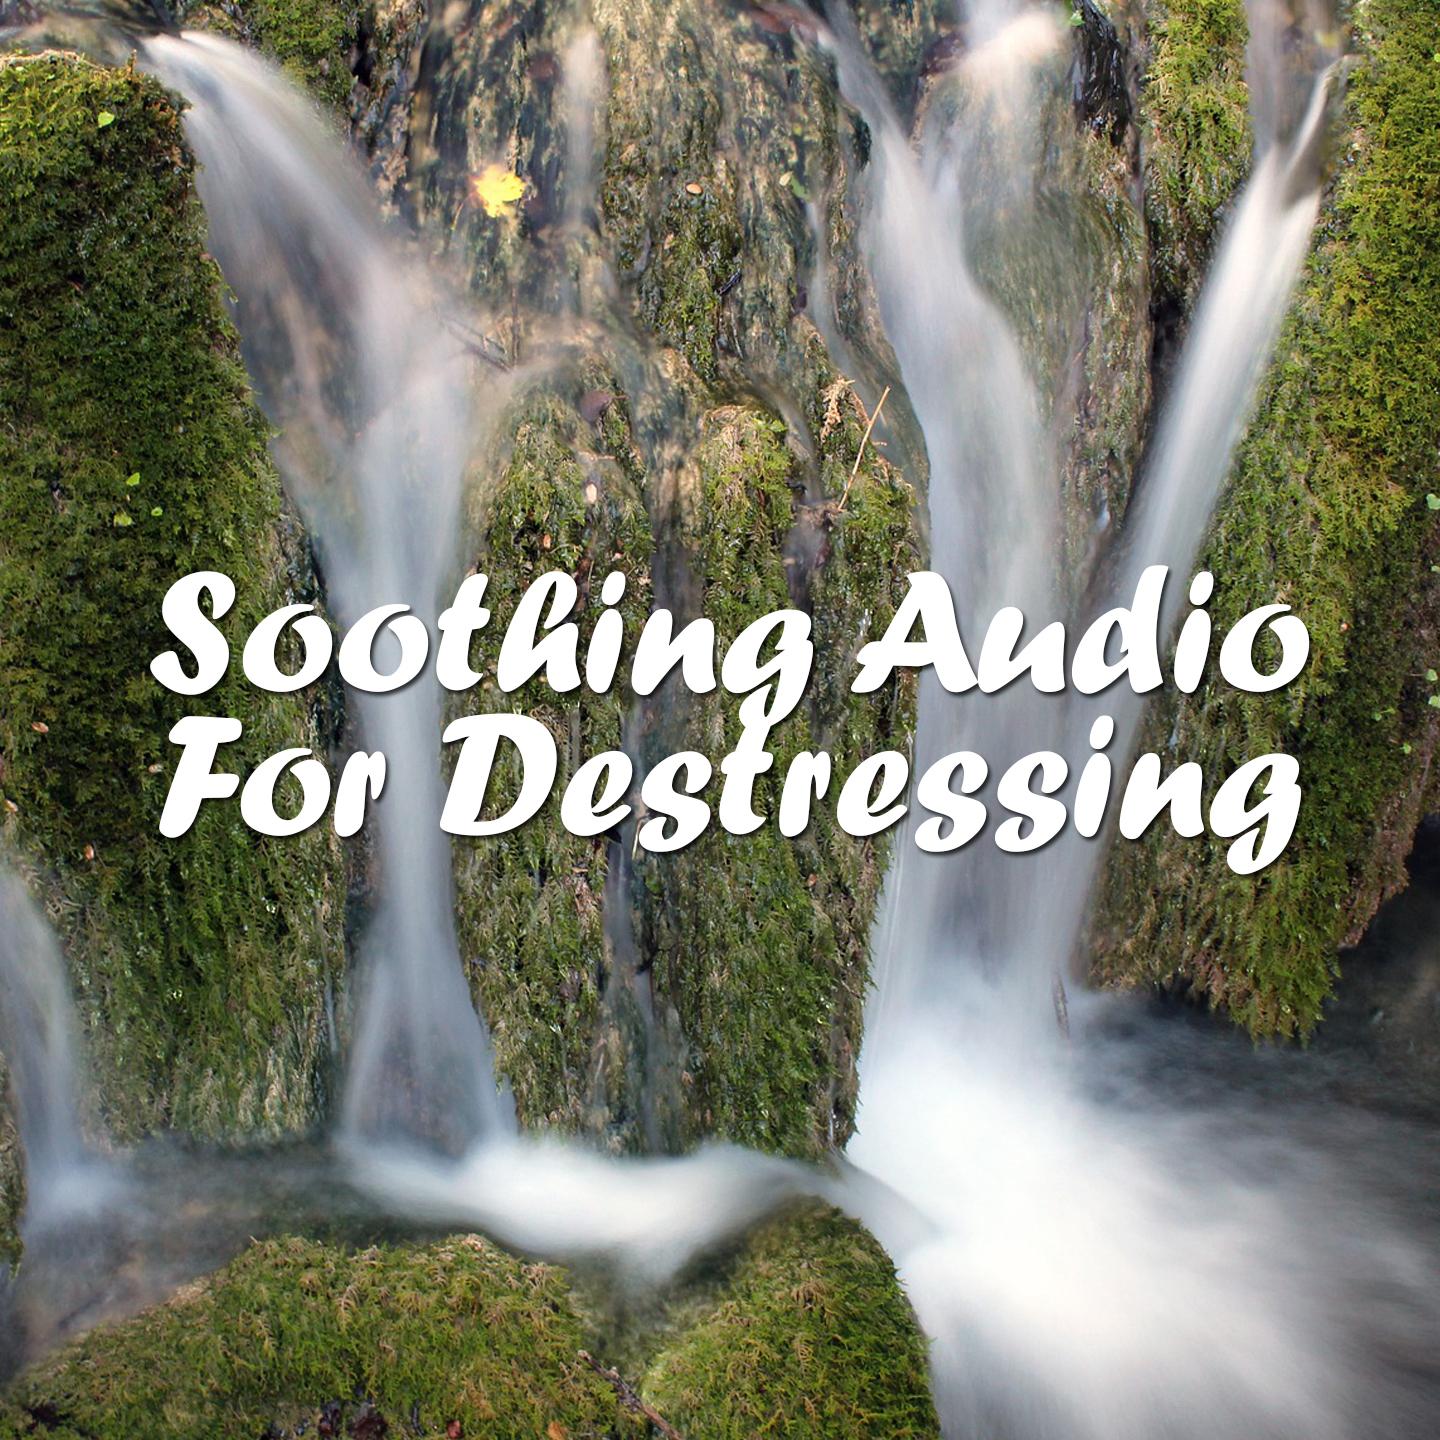 Soothing Audio For Destressing